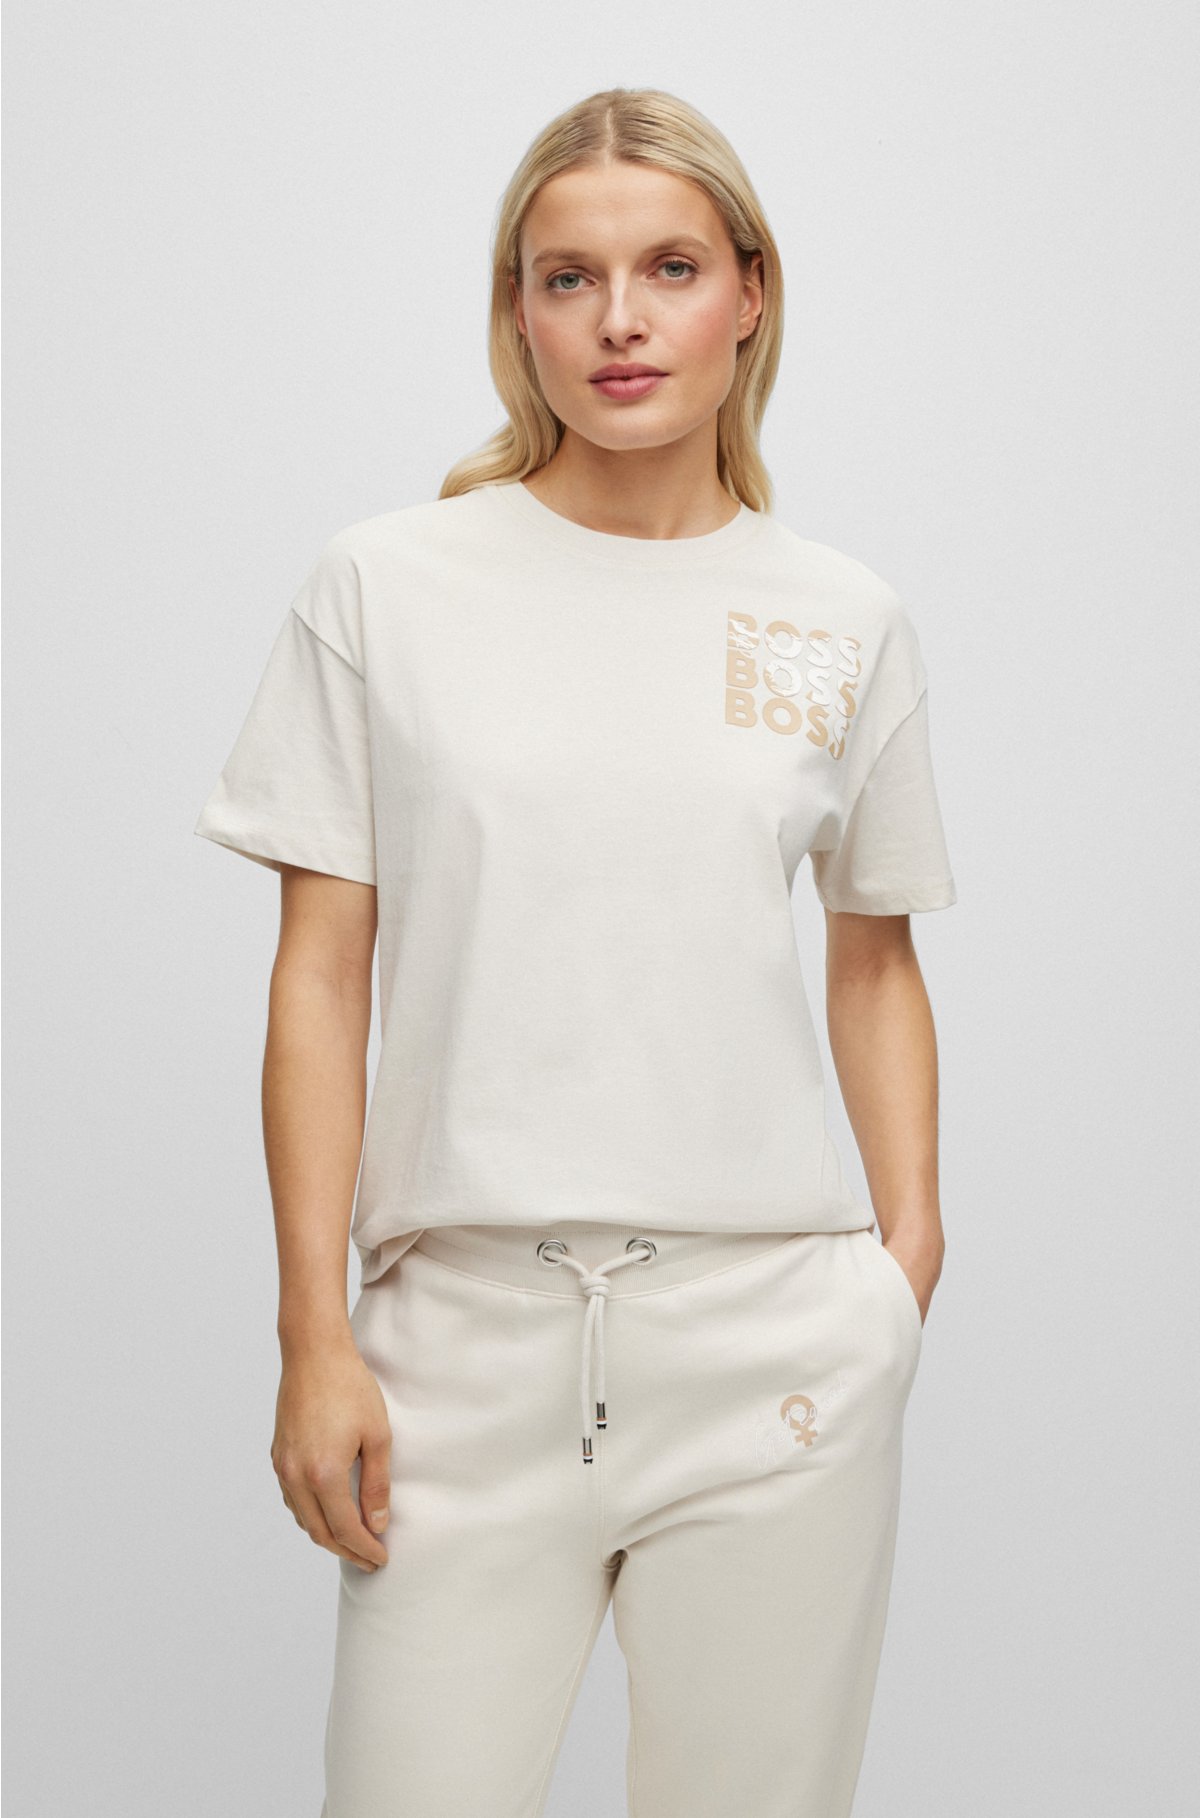 - BOSS Raddis® Cotton T-shirt in a relaxed fit with logo detailing